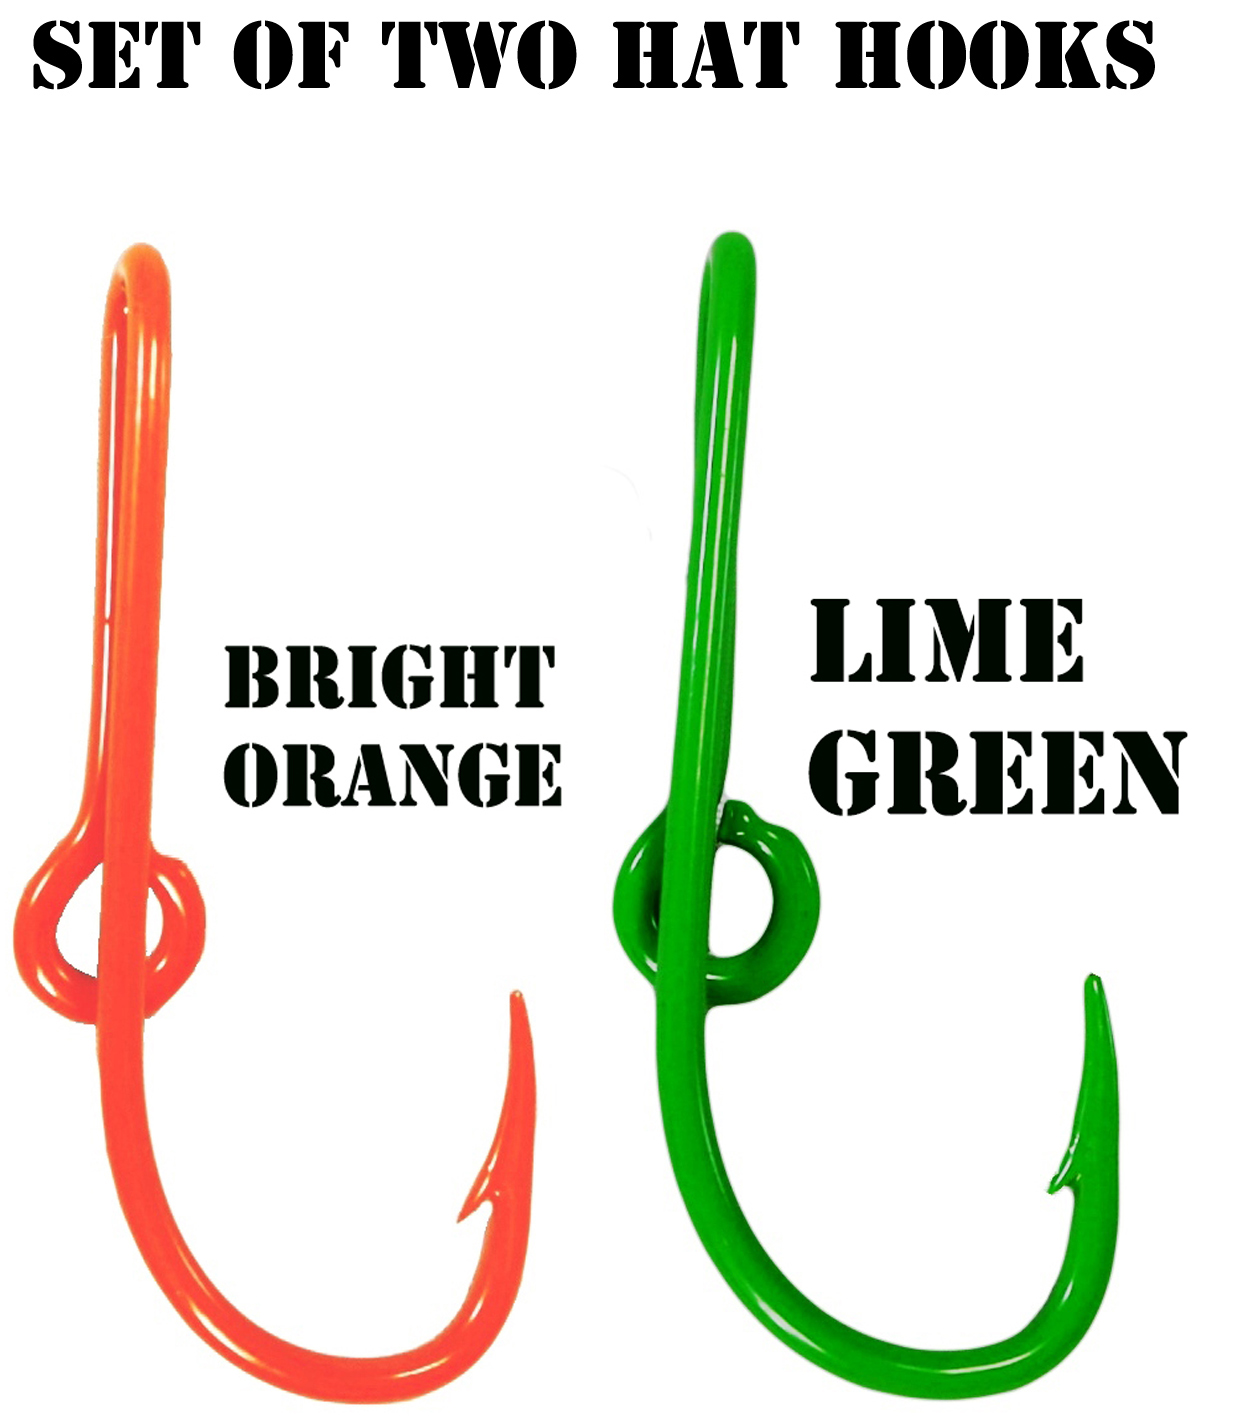 Custom Colored Eagle Claw Hat Fish Hooks for Cap -Set of Two Hat pins- One Bright Orange and One Lime Green Hat Hook Money/Tie Clasp - image 1 of 3